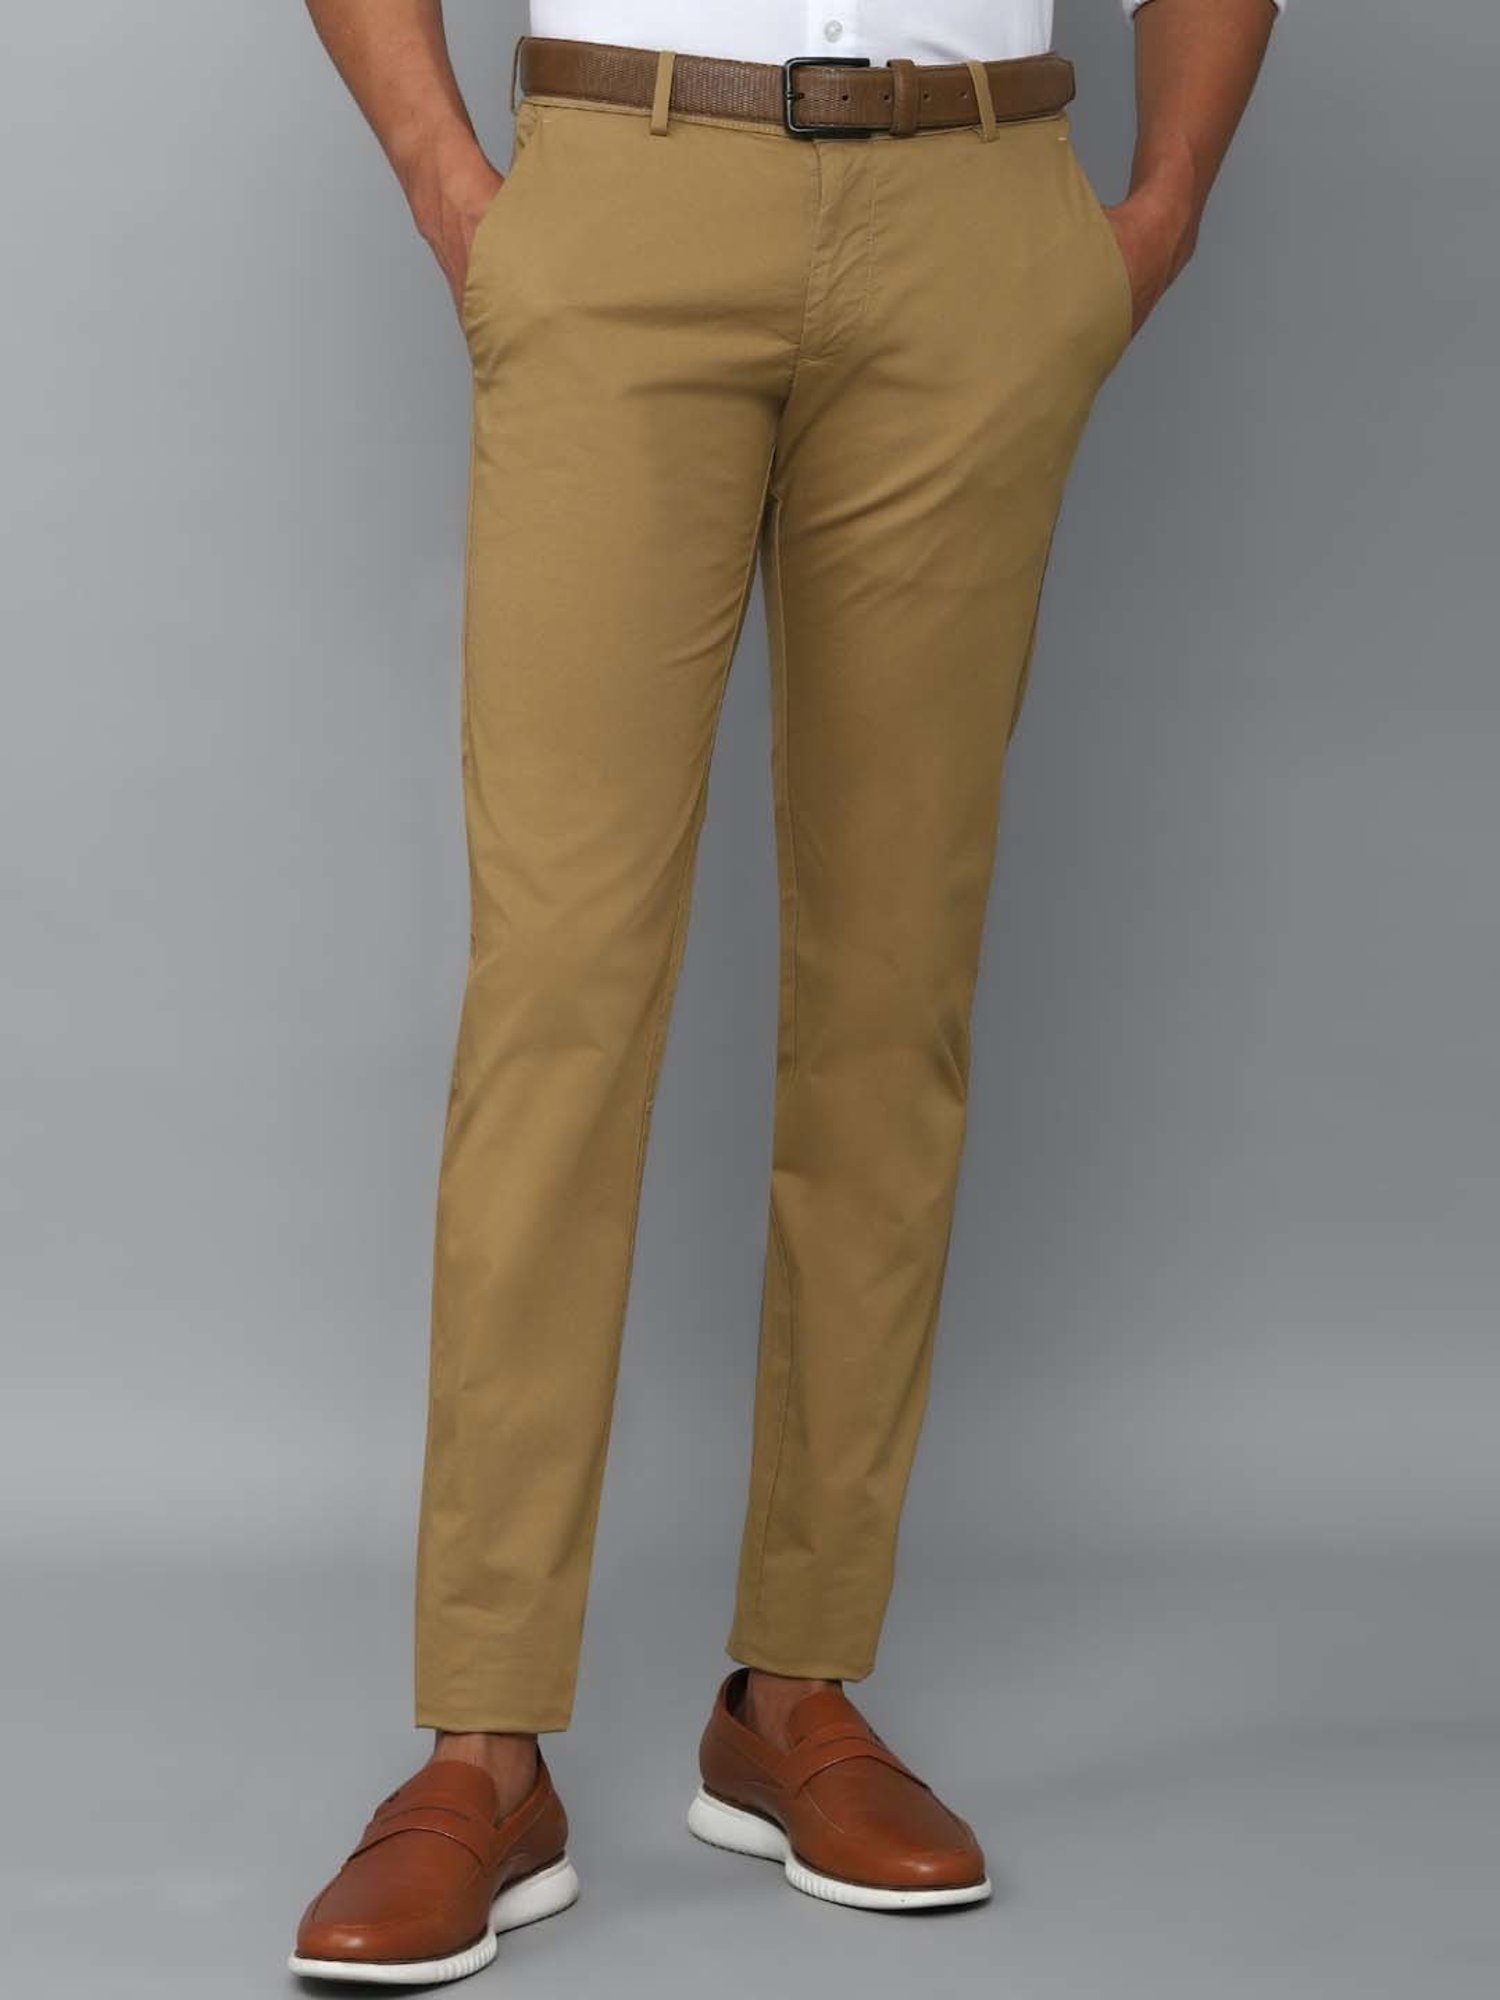 Allen Solly Trousers and Pants  Buy Allen Solly Pink Solid Trousers Set  of 2 Online  Nykaa Fashion